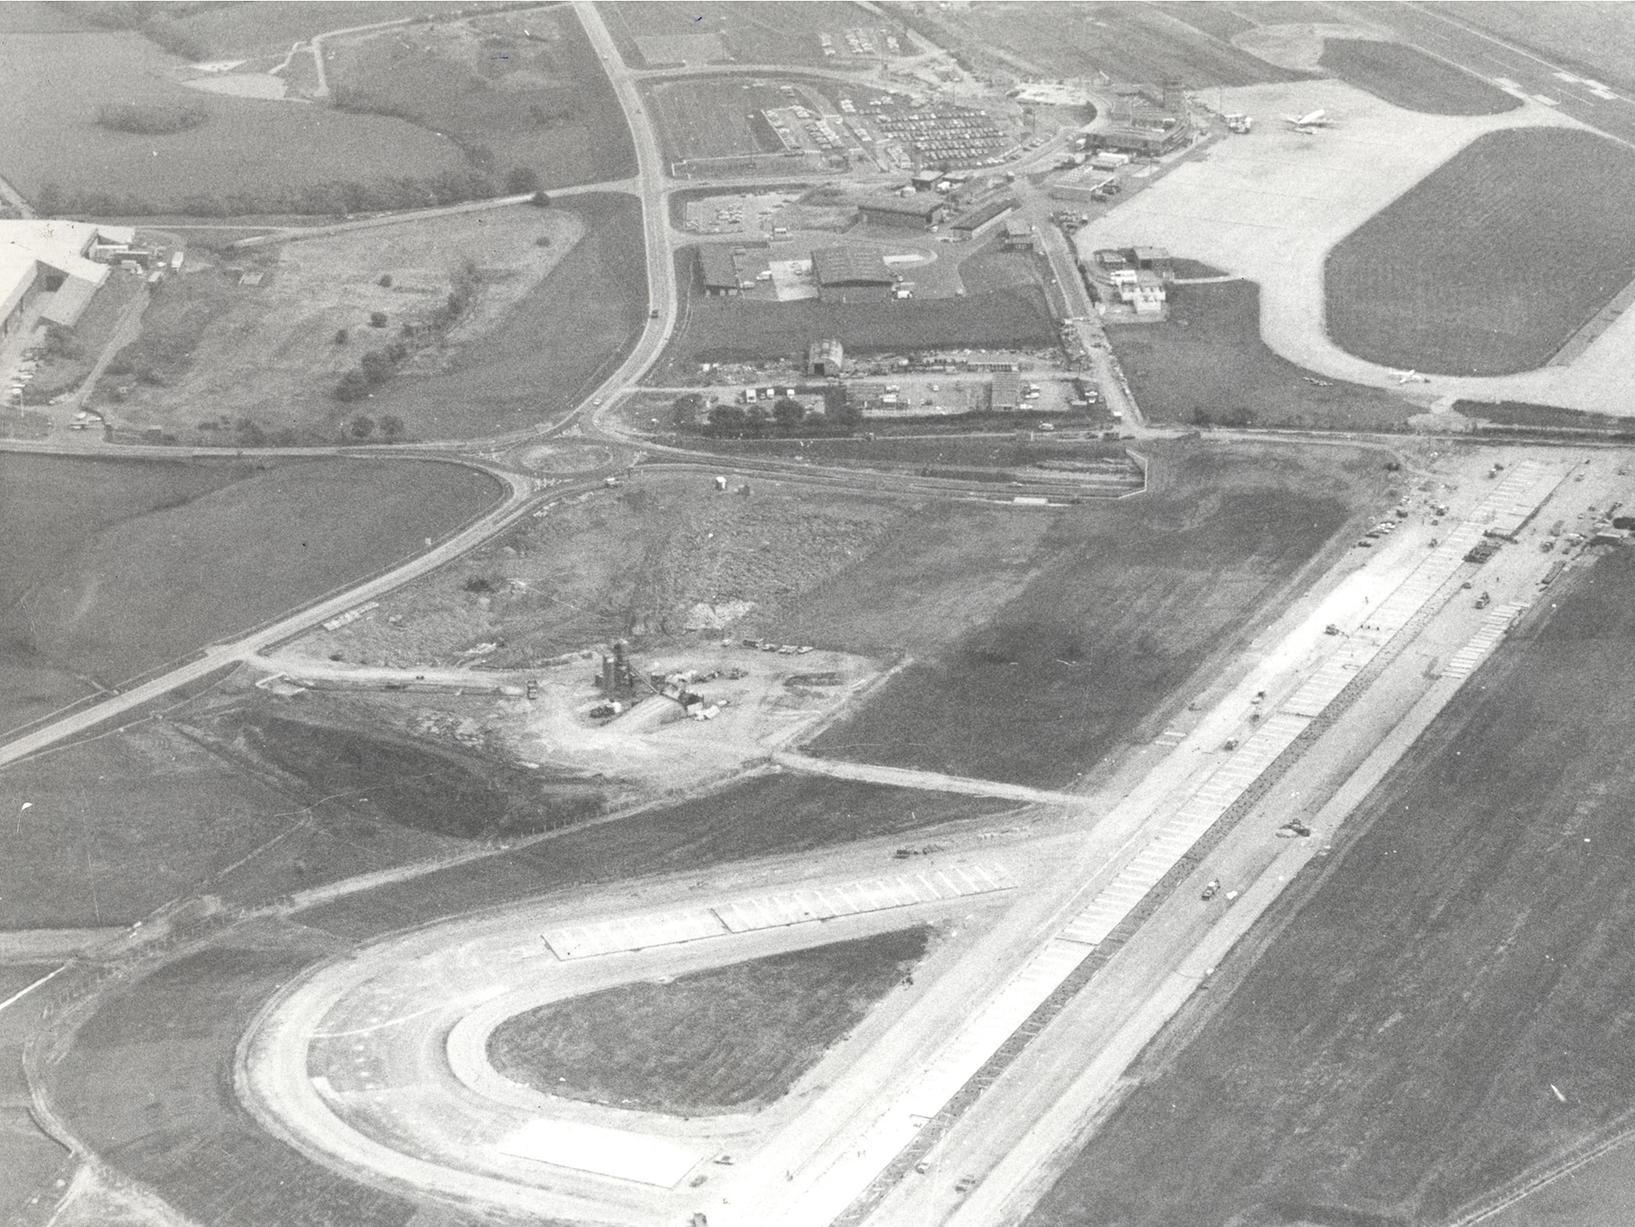 The runway extension at Leeds Bradford Airport from the air.